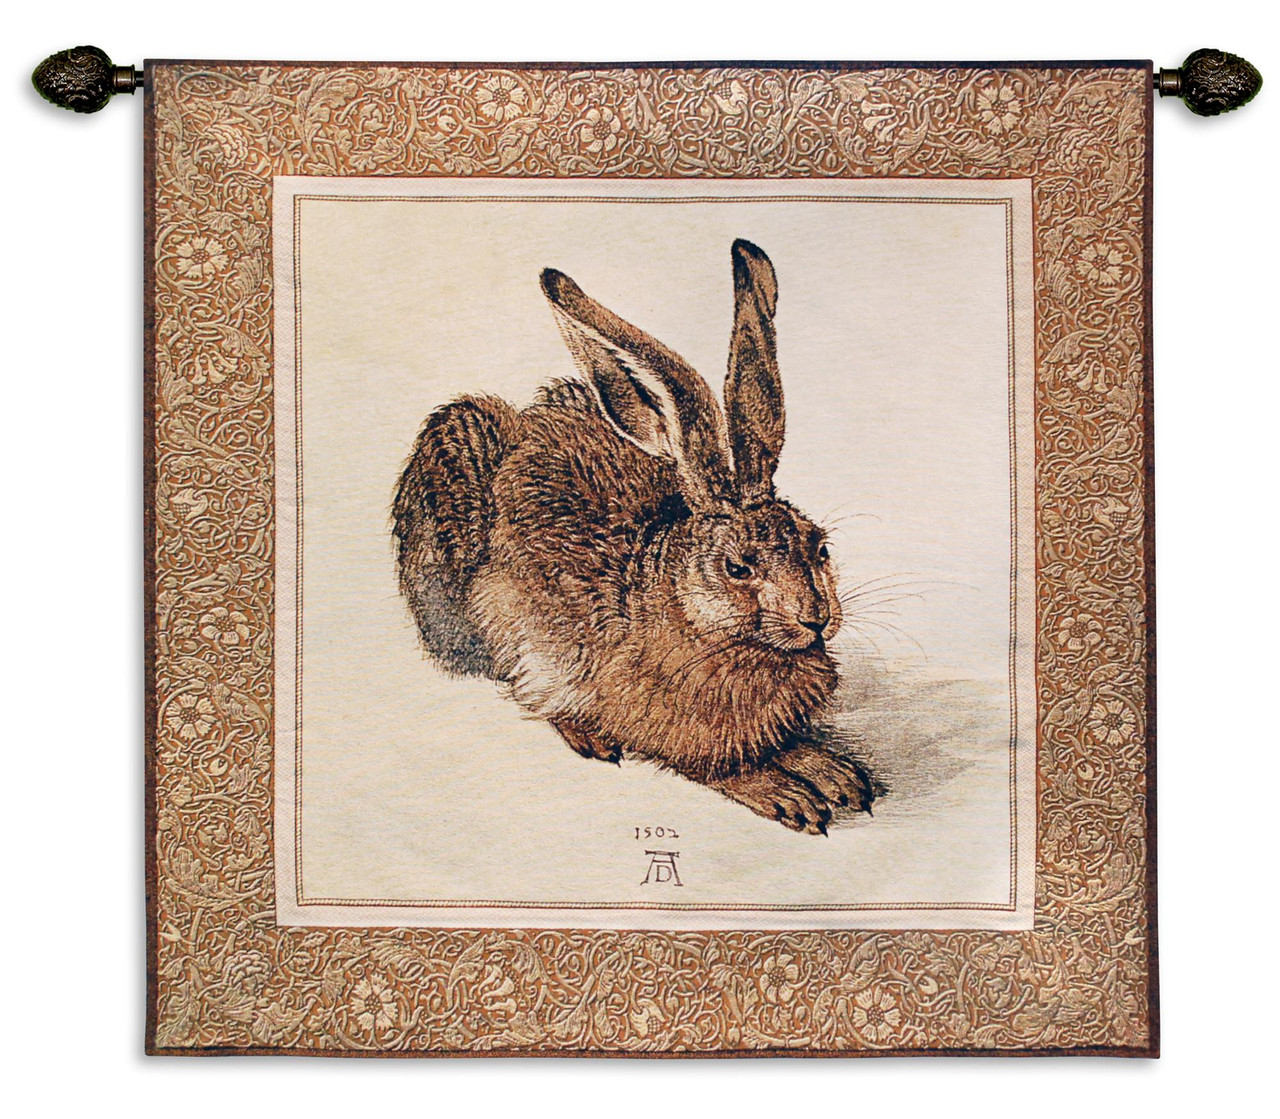 Young Hare by Albrecht Durer Woven Tapestry Wall Art Hanging Detailed  Earthy Classic 16th century Painting 100% Cotton USA Size 45x42